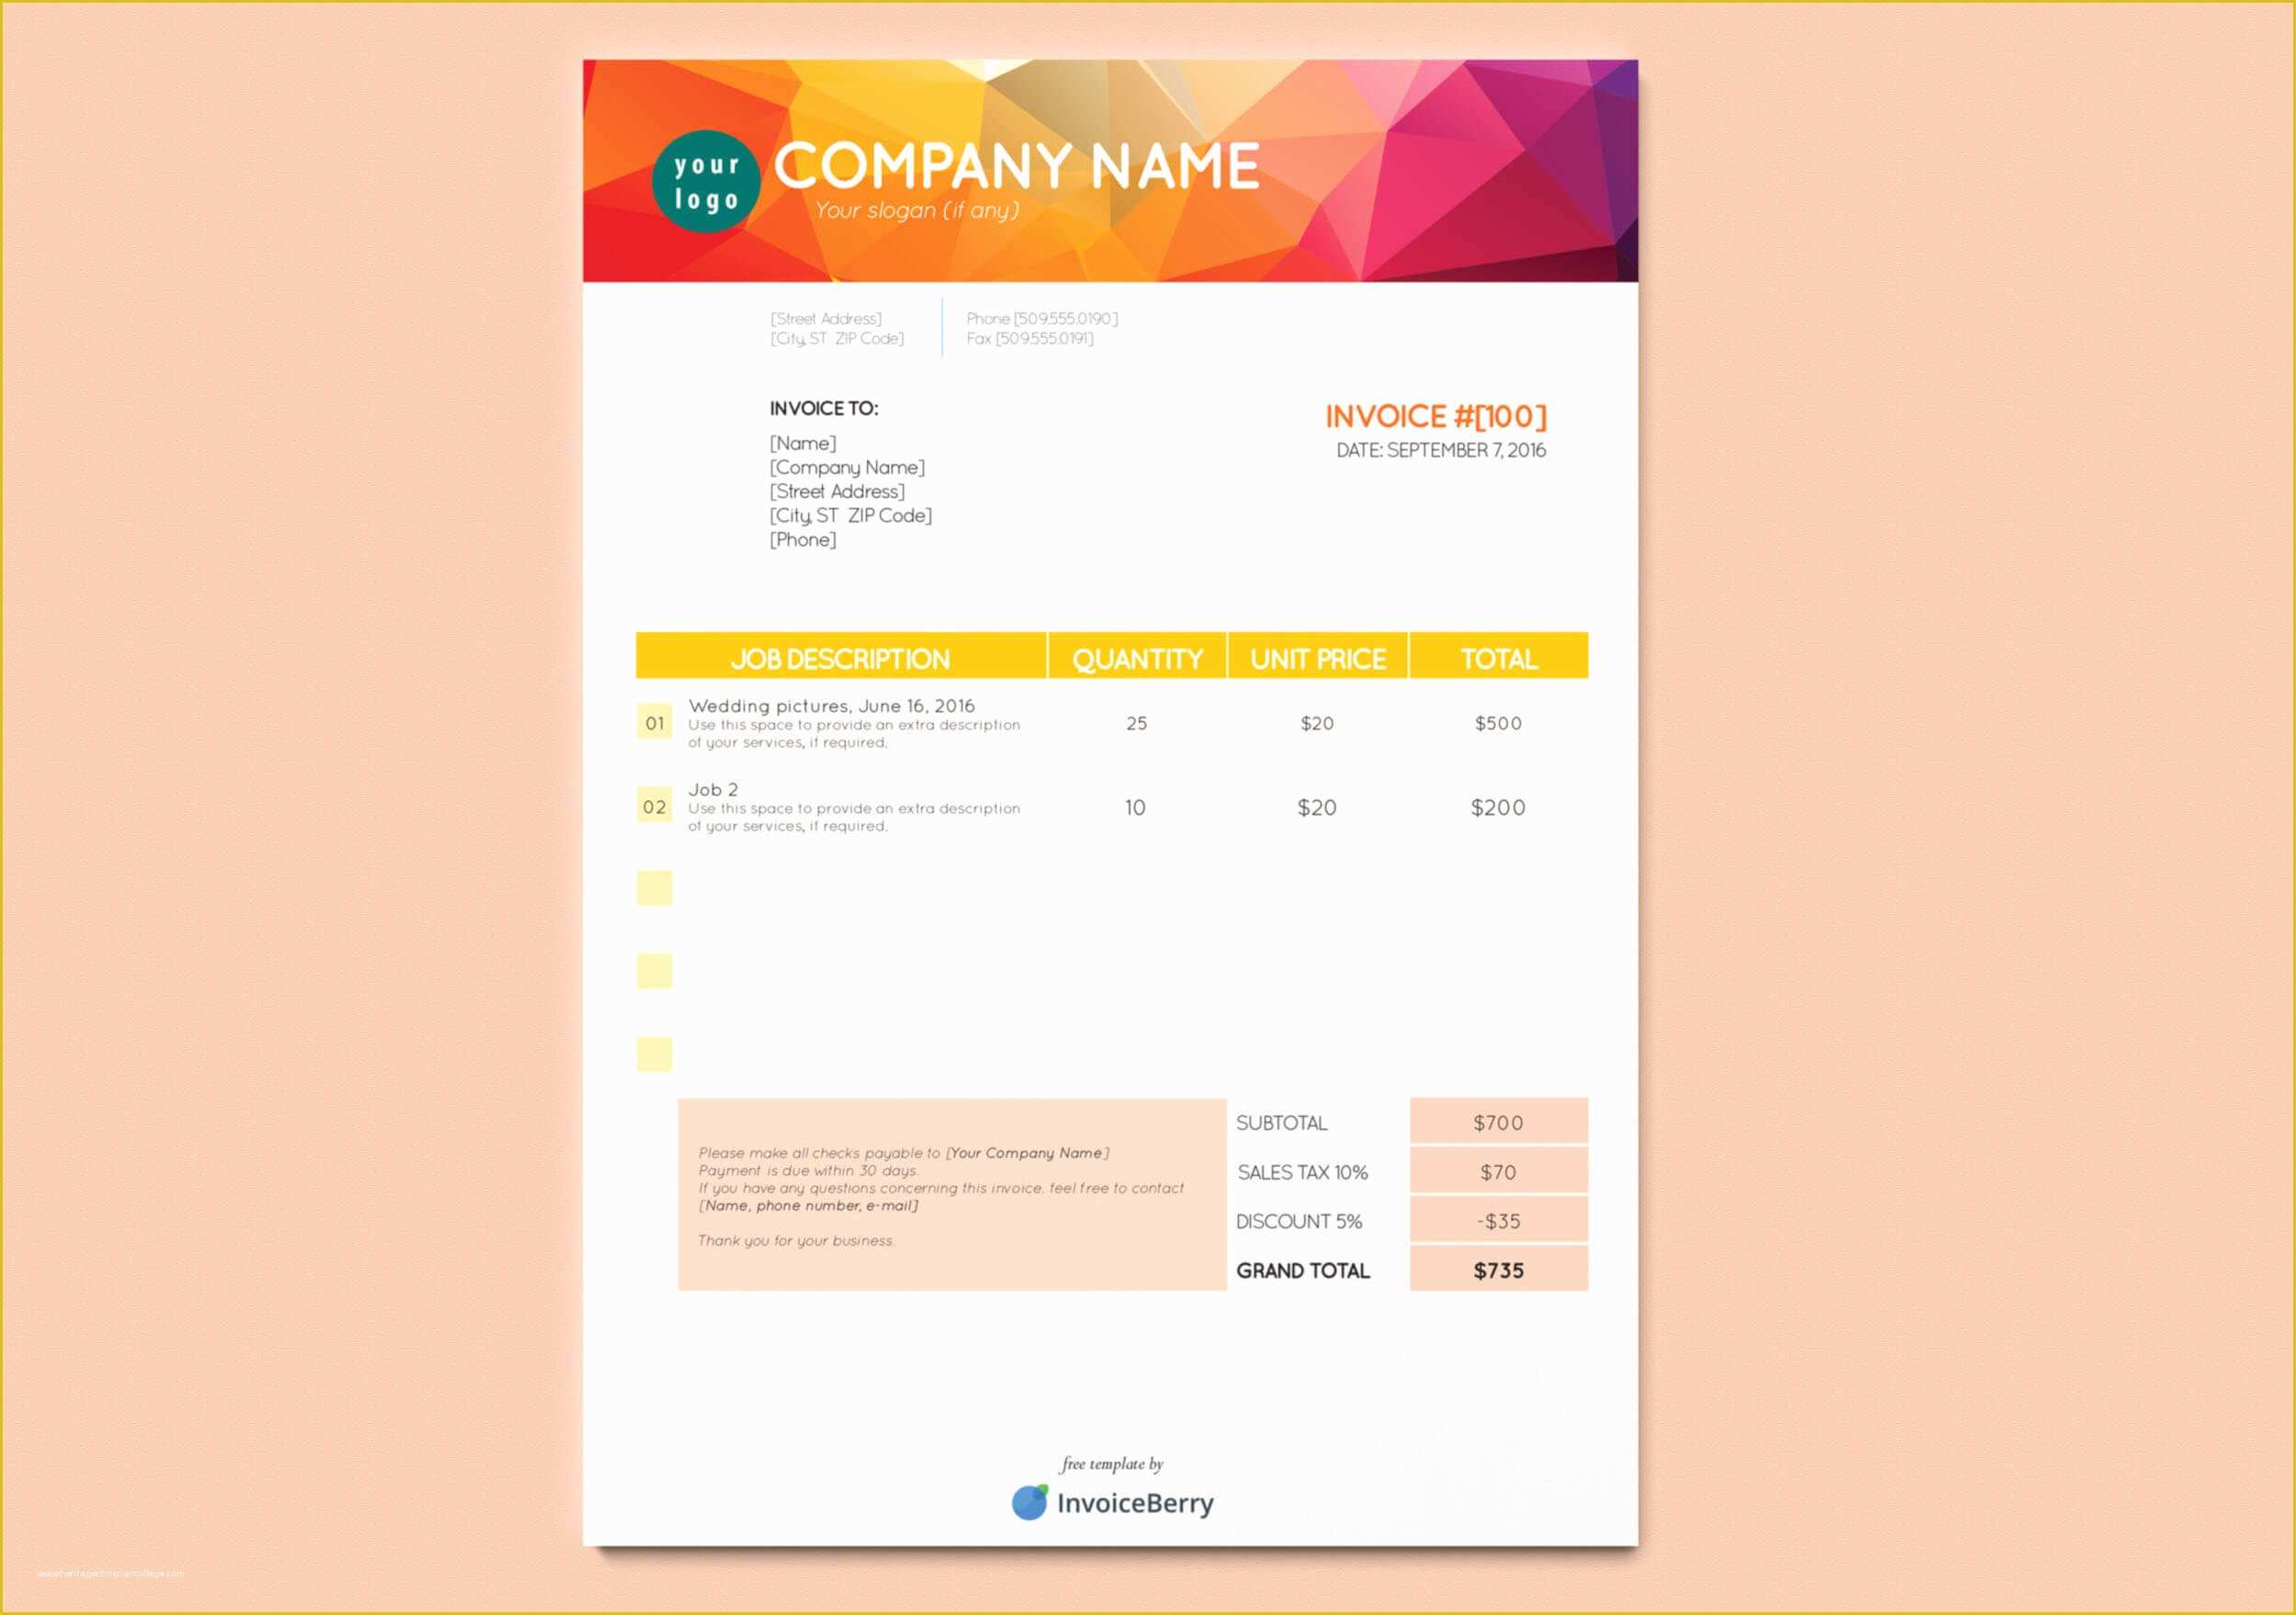 Template Indesign Free Of Free New Indesign Invoice Templates